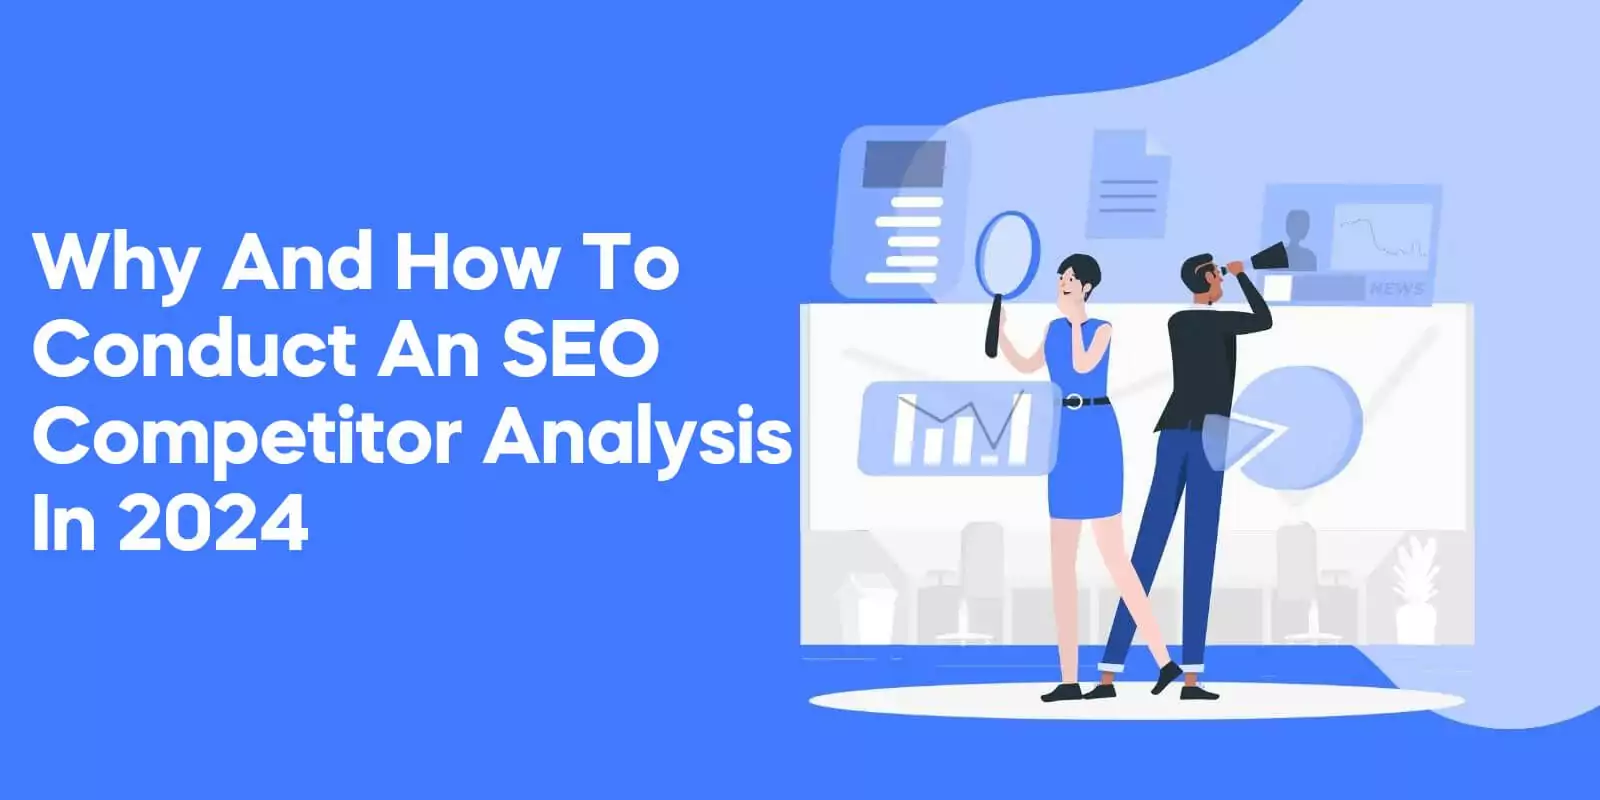 Why and How to Conduct an SEO Competitor Analysis in 2024